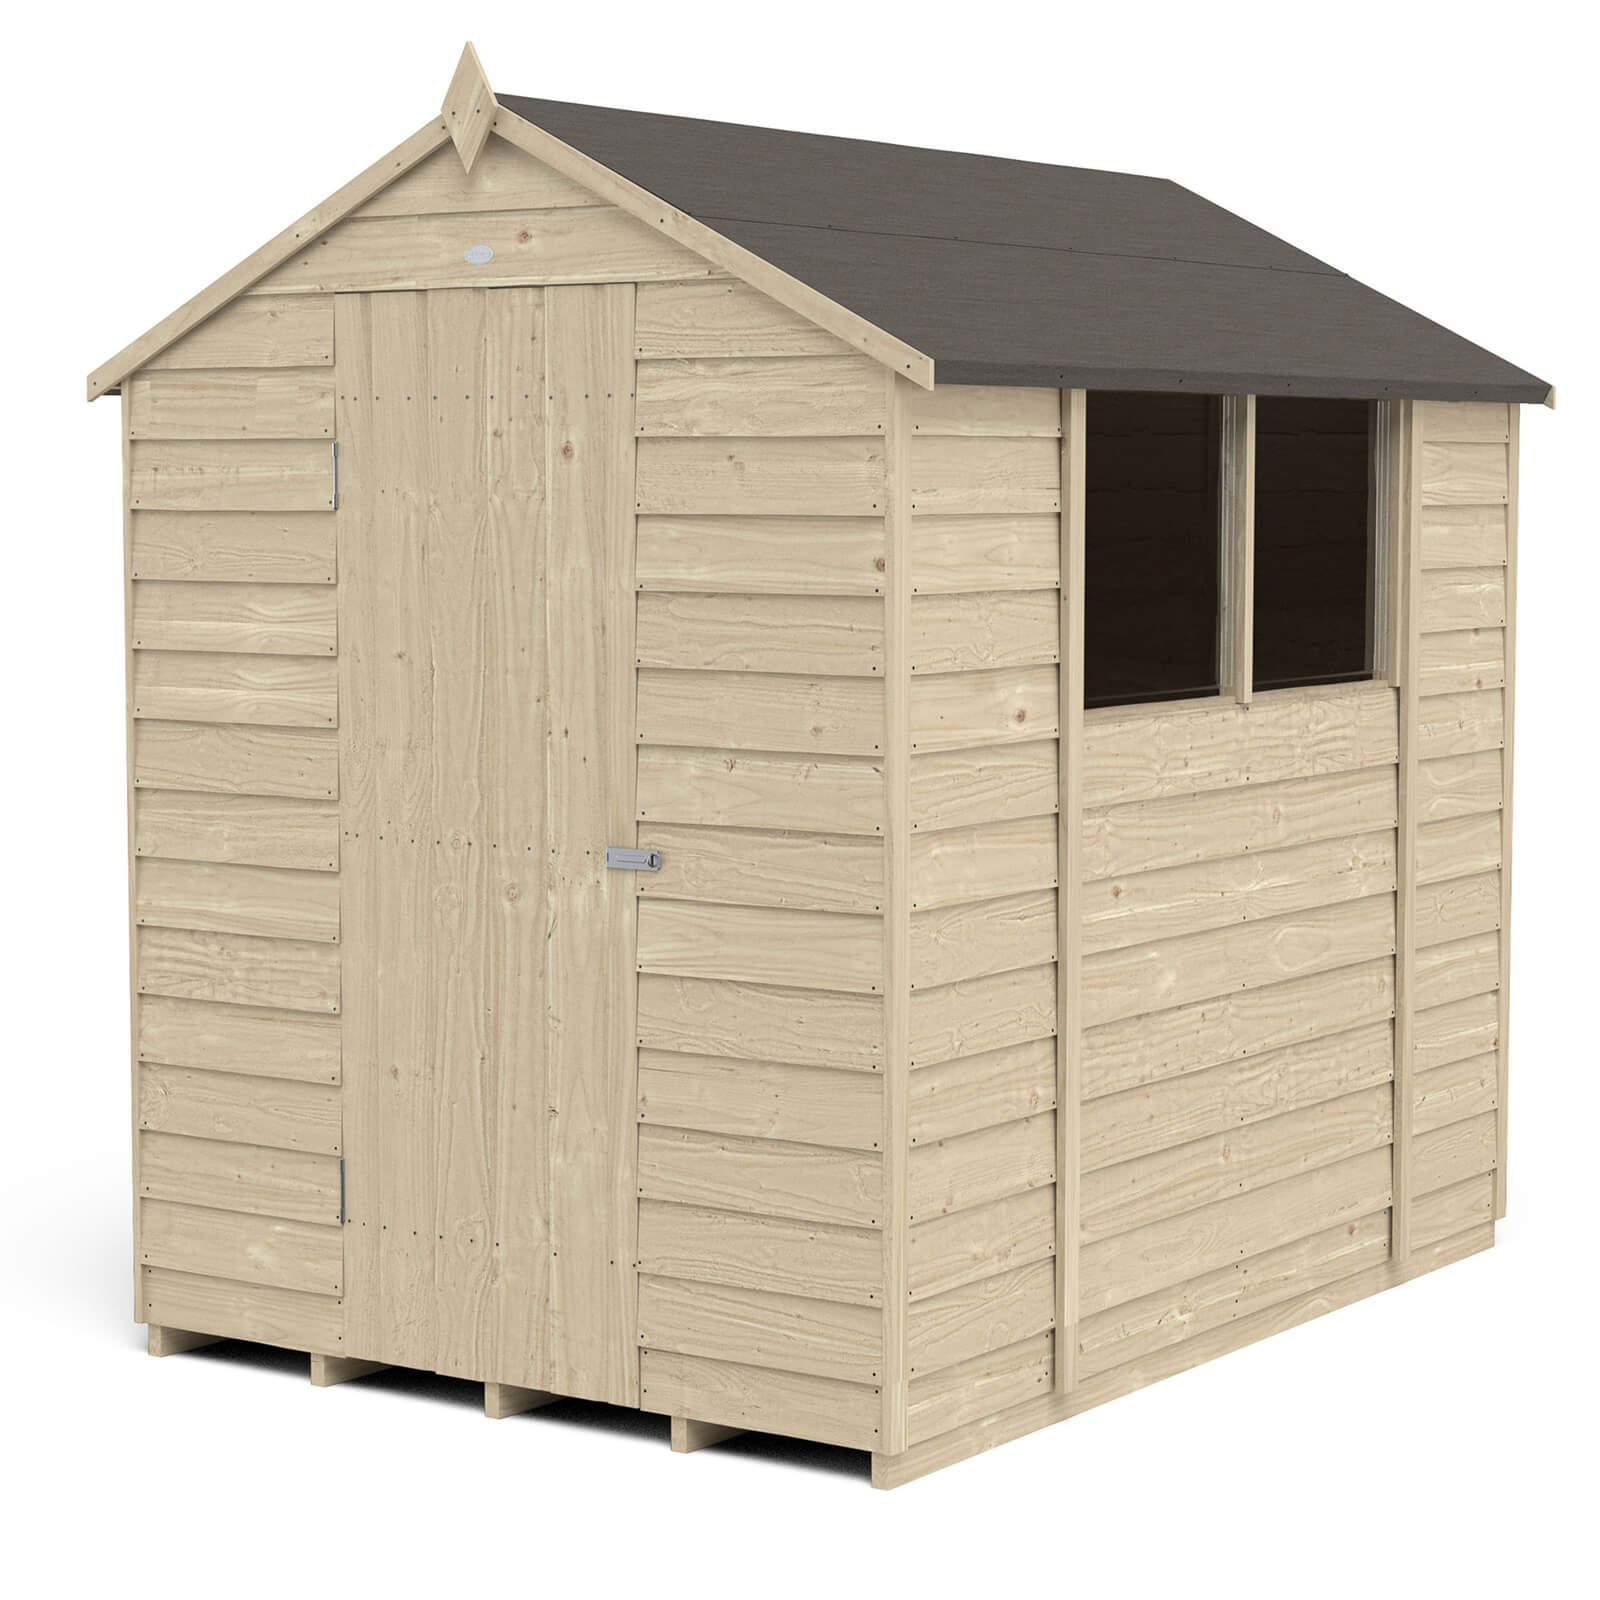 Forest 7 x 5ft Overlap Pressure Treated Apex Shed